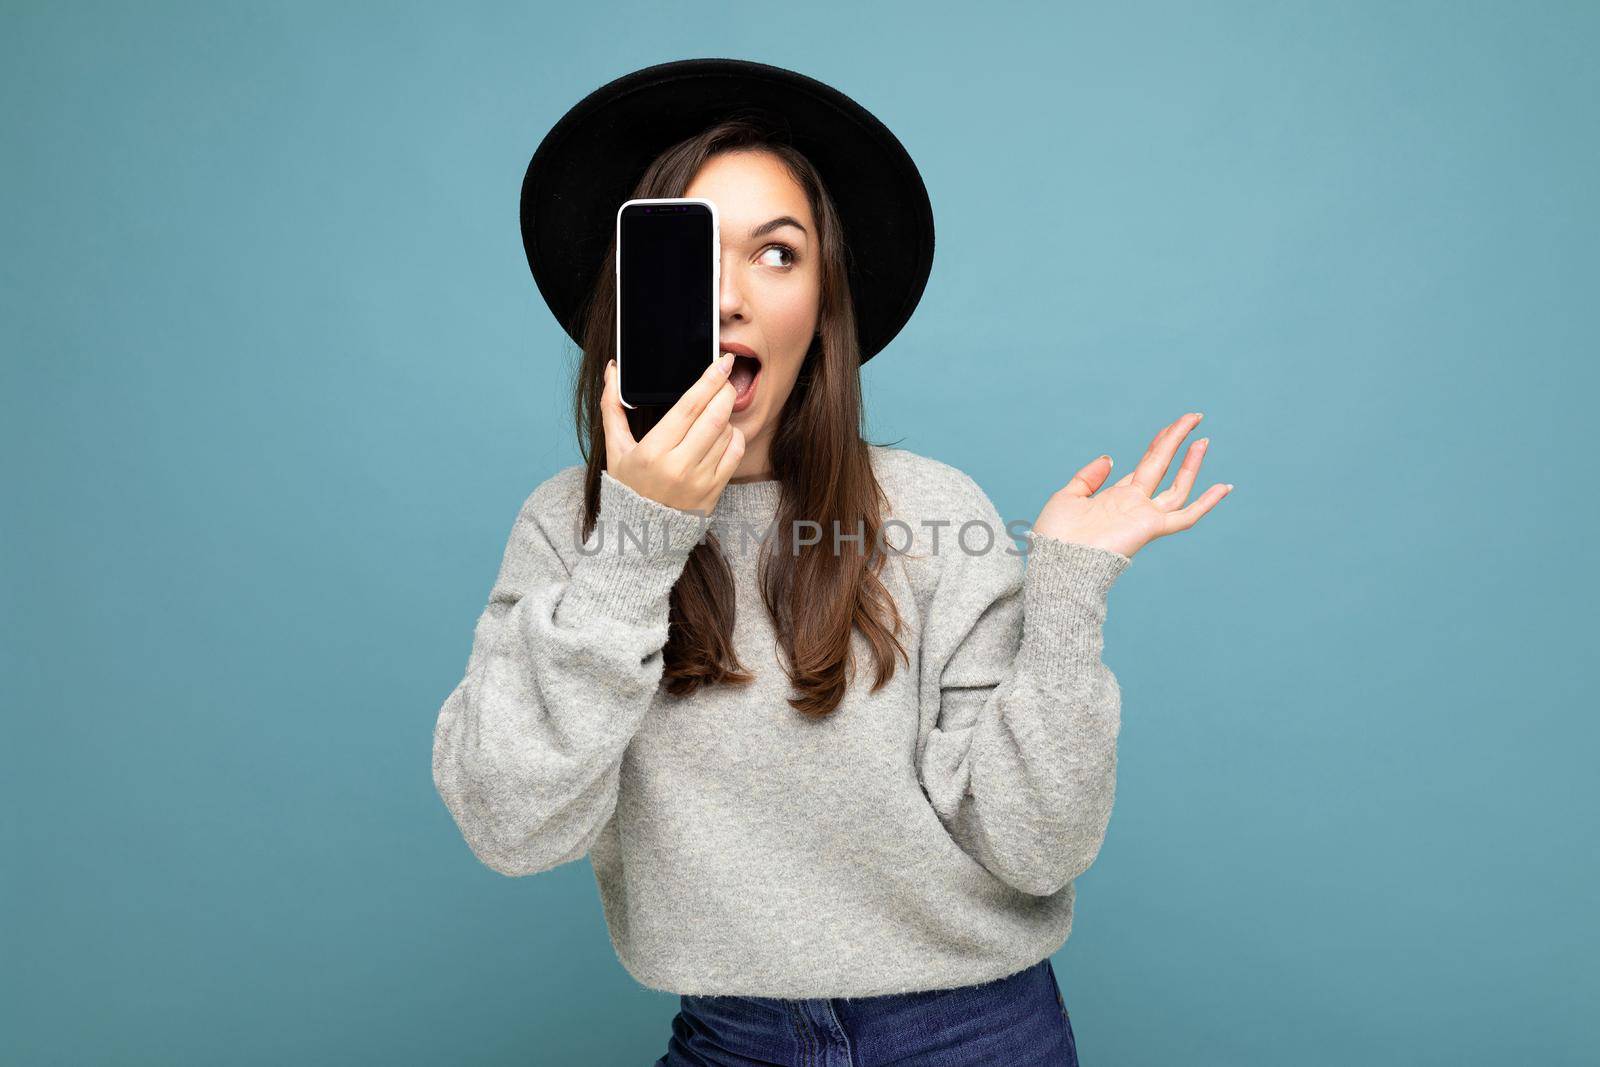 Amazed Beautiful positive woman wearing black hat and grey sweater holding mobilephone showing smartphone isolated on background looking to the side with open mouth by TRMK